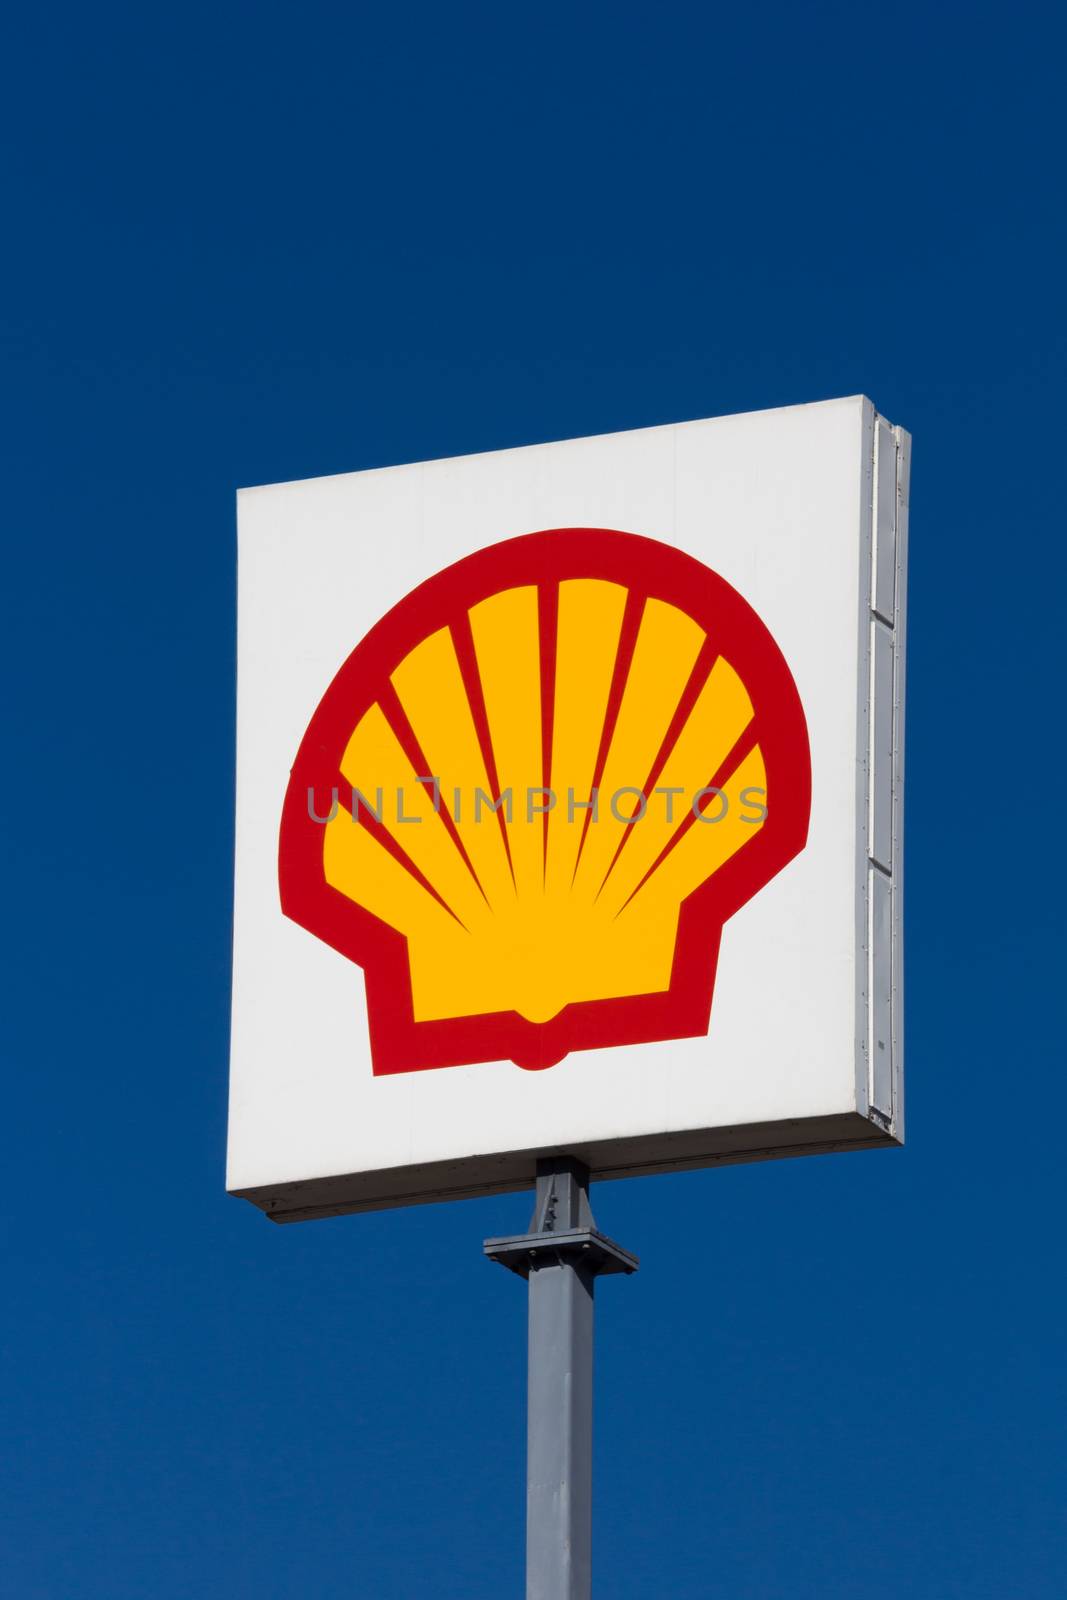 SANTA CLARITA, CA/USA - OCTOBER 1, 2014: Shell Oil filling station sign and logo. Shell Oil Company is among the largest oil companies in the world.